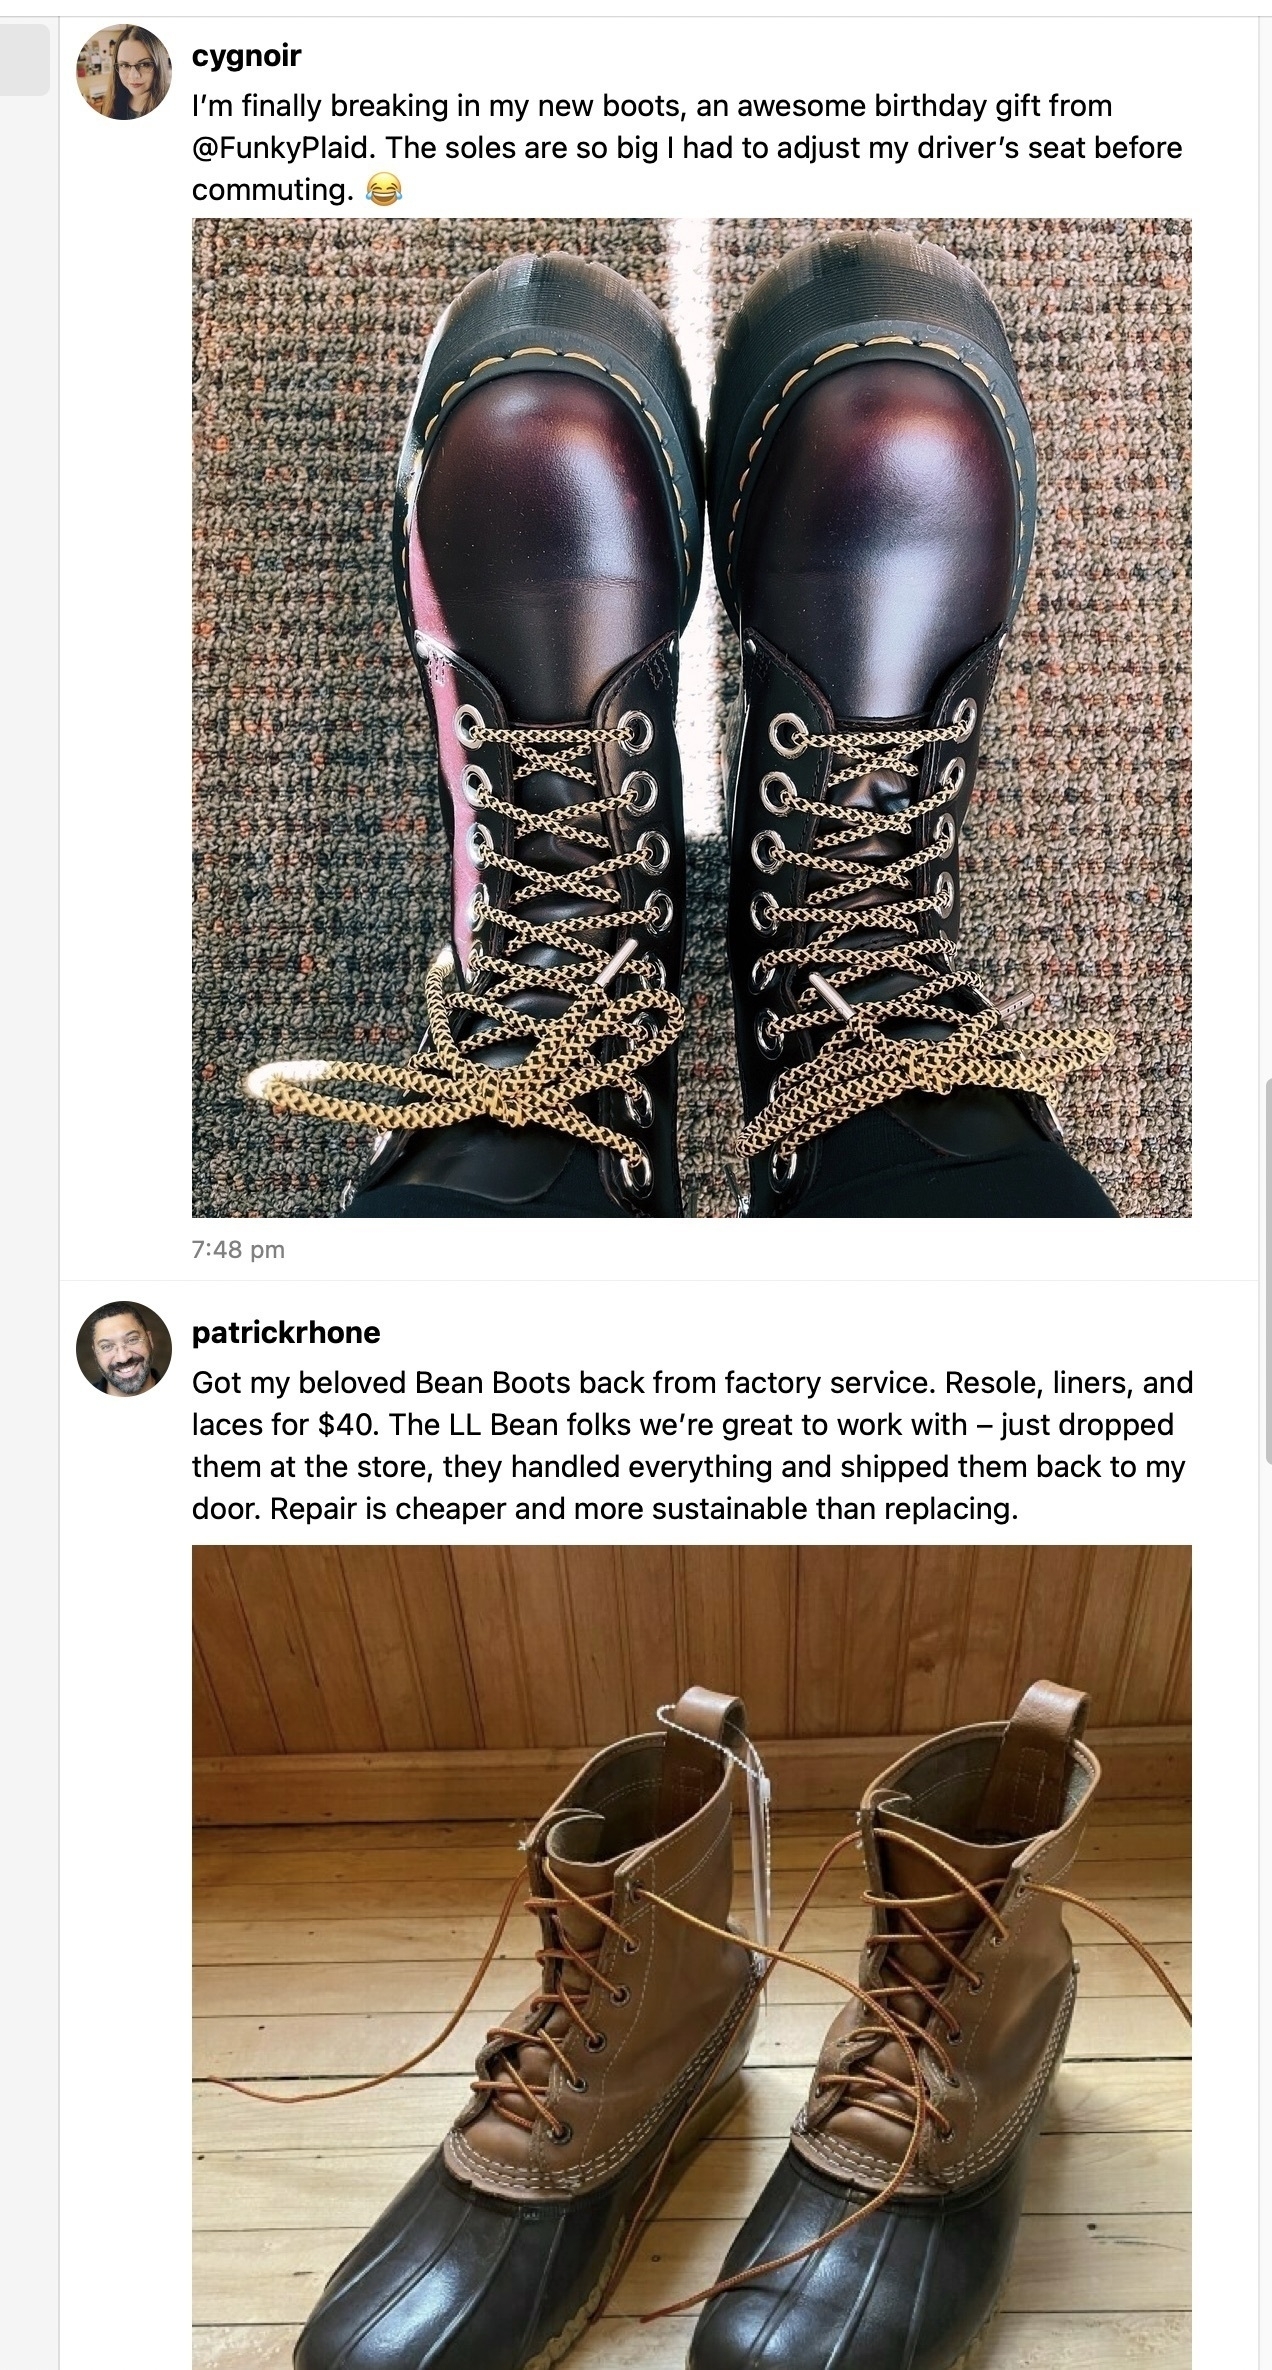 Screenshot of the Micro.blog timeline, showing two posts in a row that feature a photos of pairs of boots.